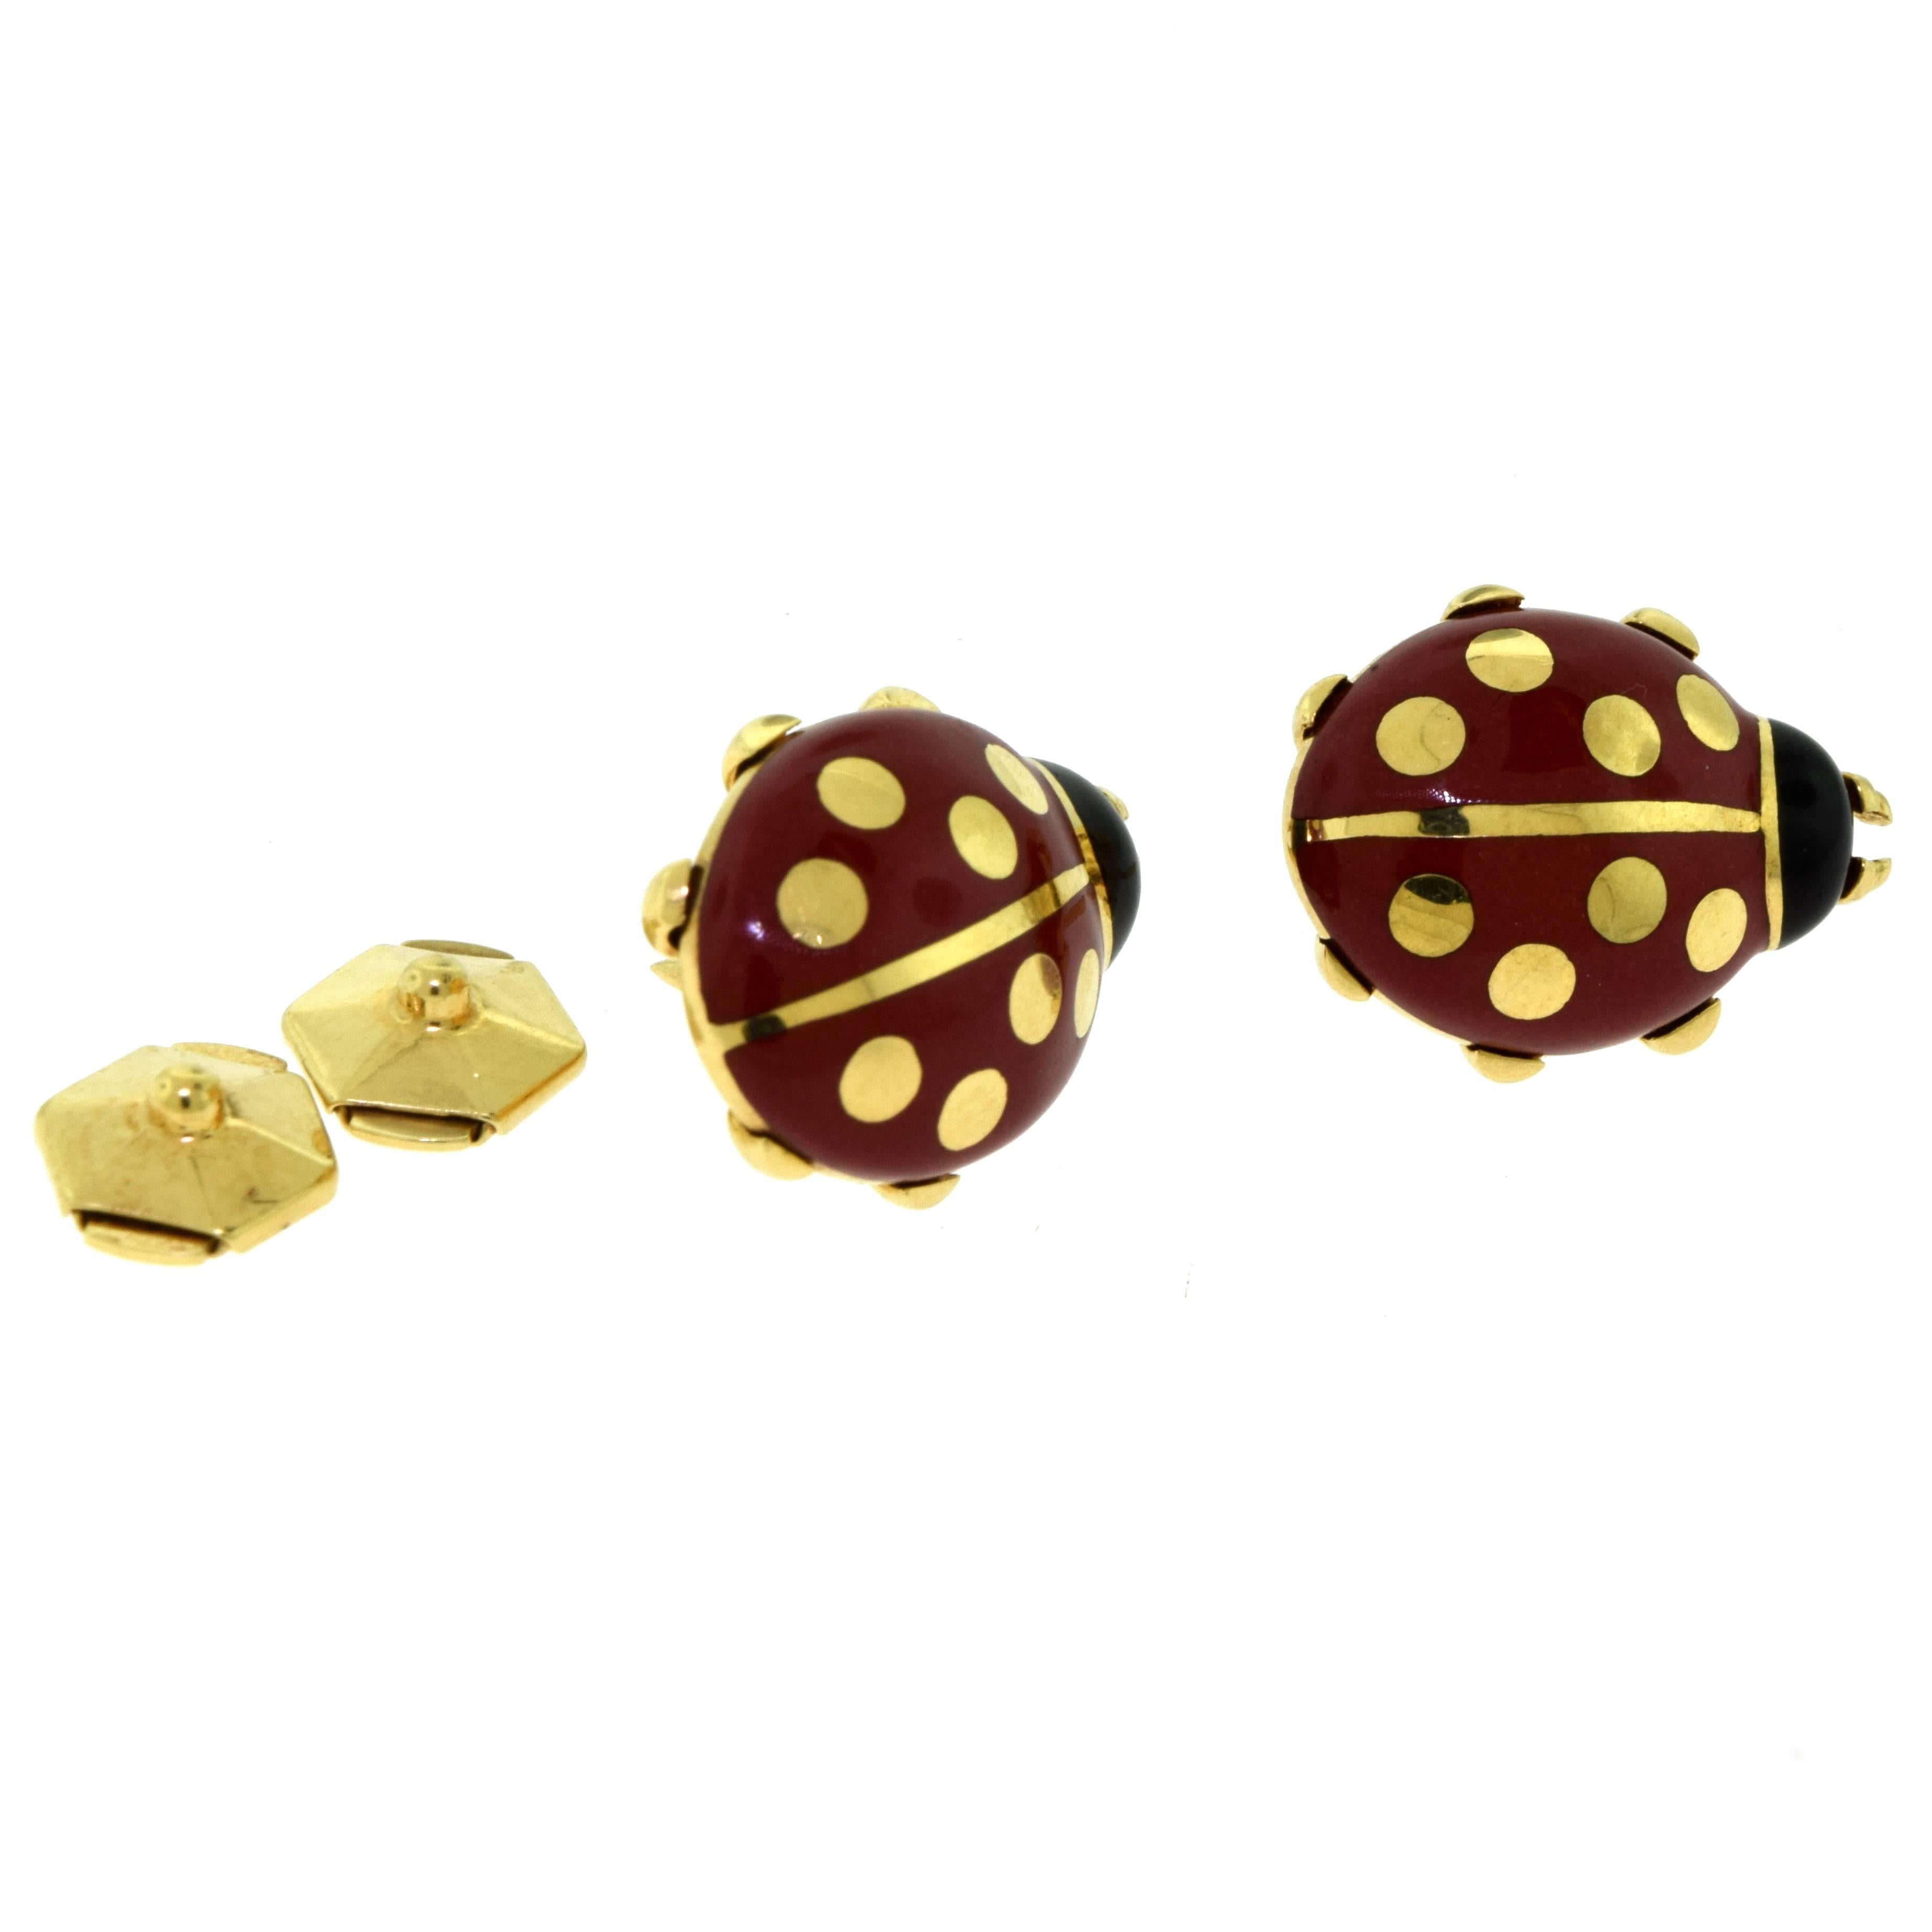 Vintage Cartier Ladybug 18 Karat Yellow Gold Brooch, Two-Piece Brooch Set In Excellent Condition For Sale In Miami, FL